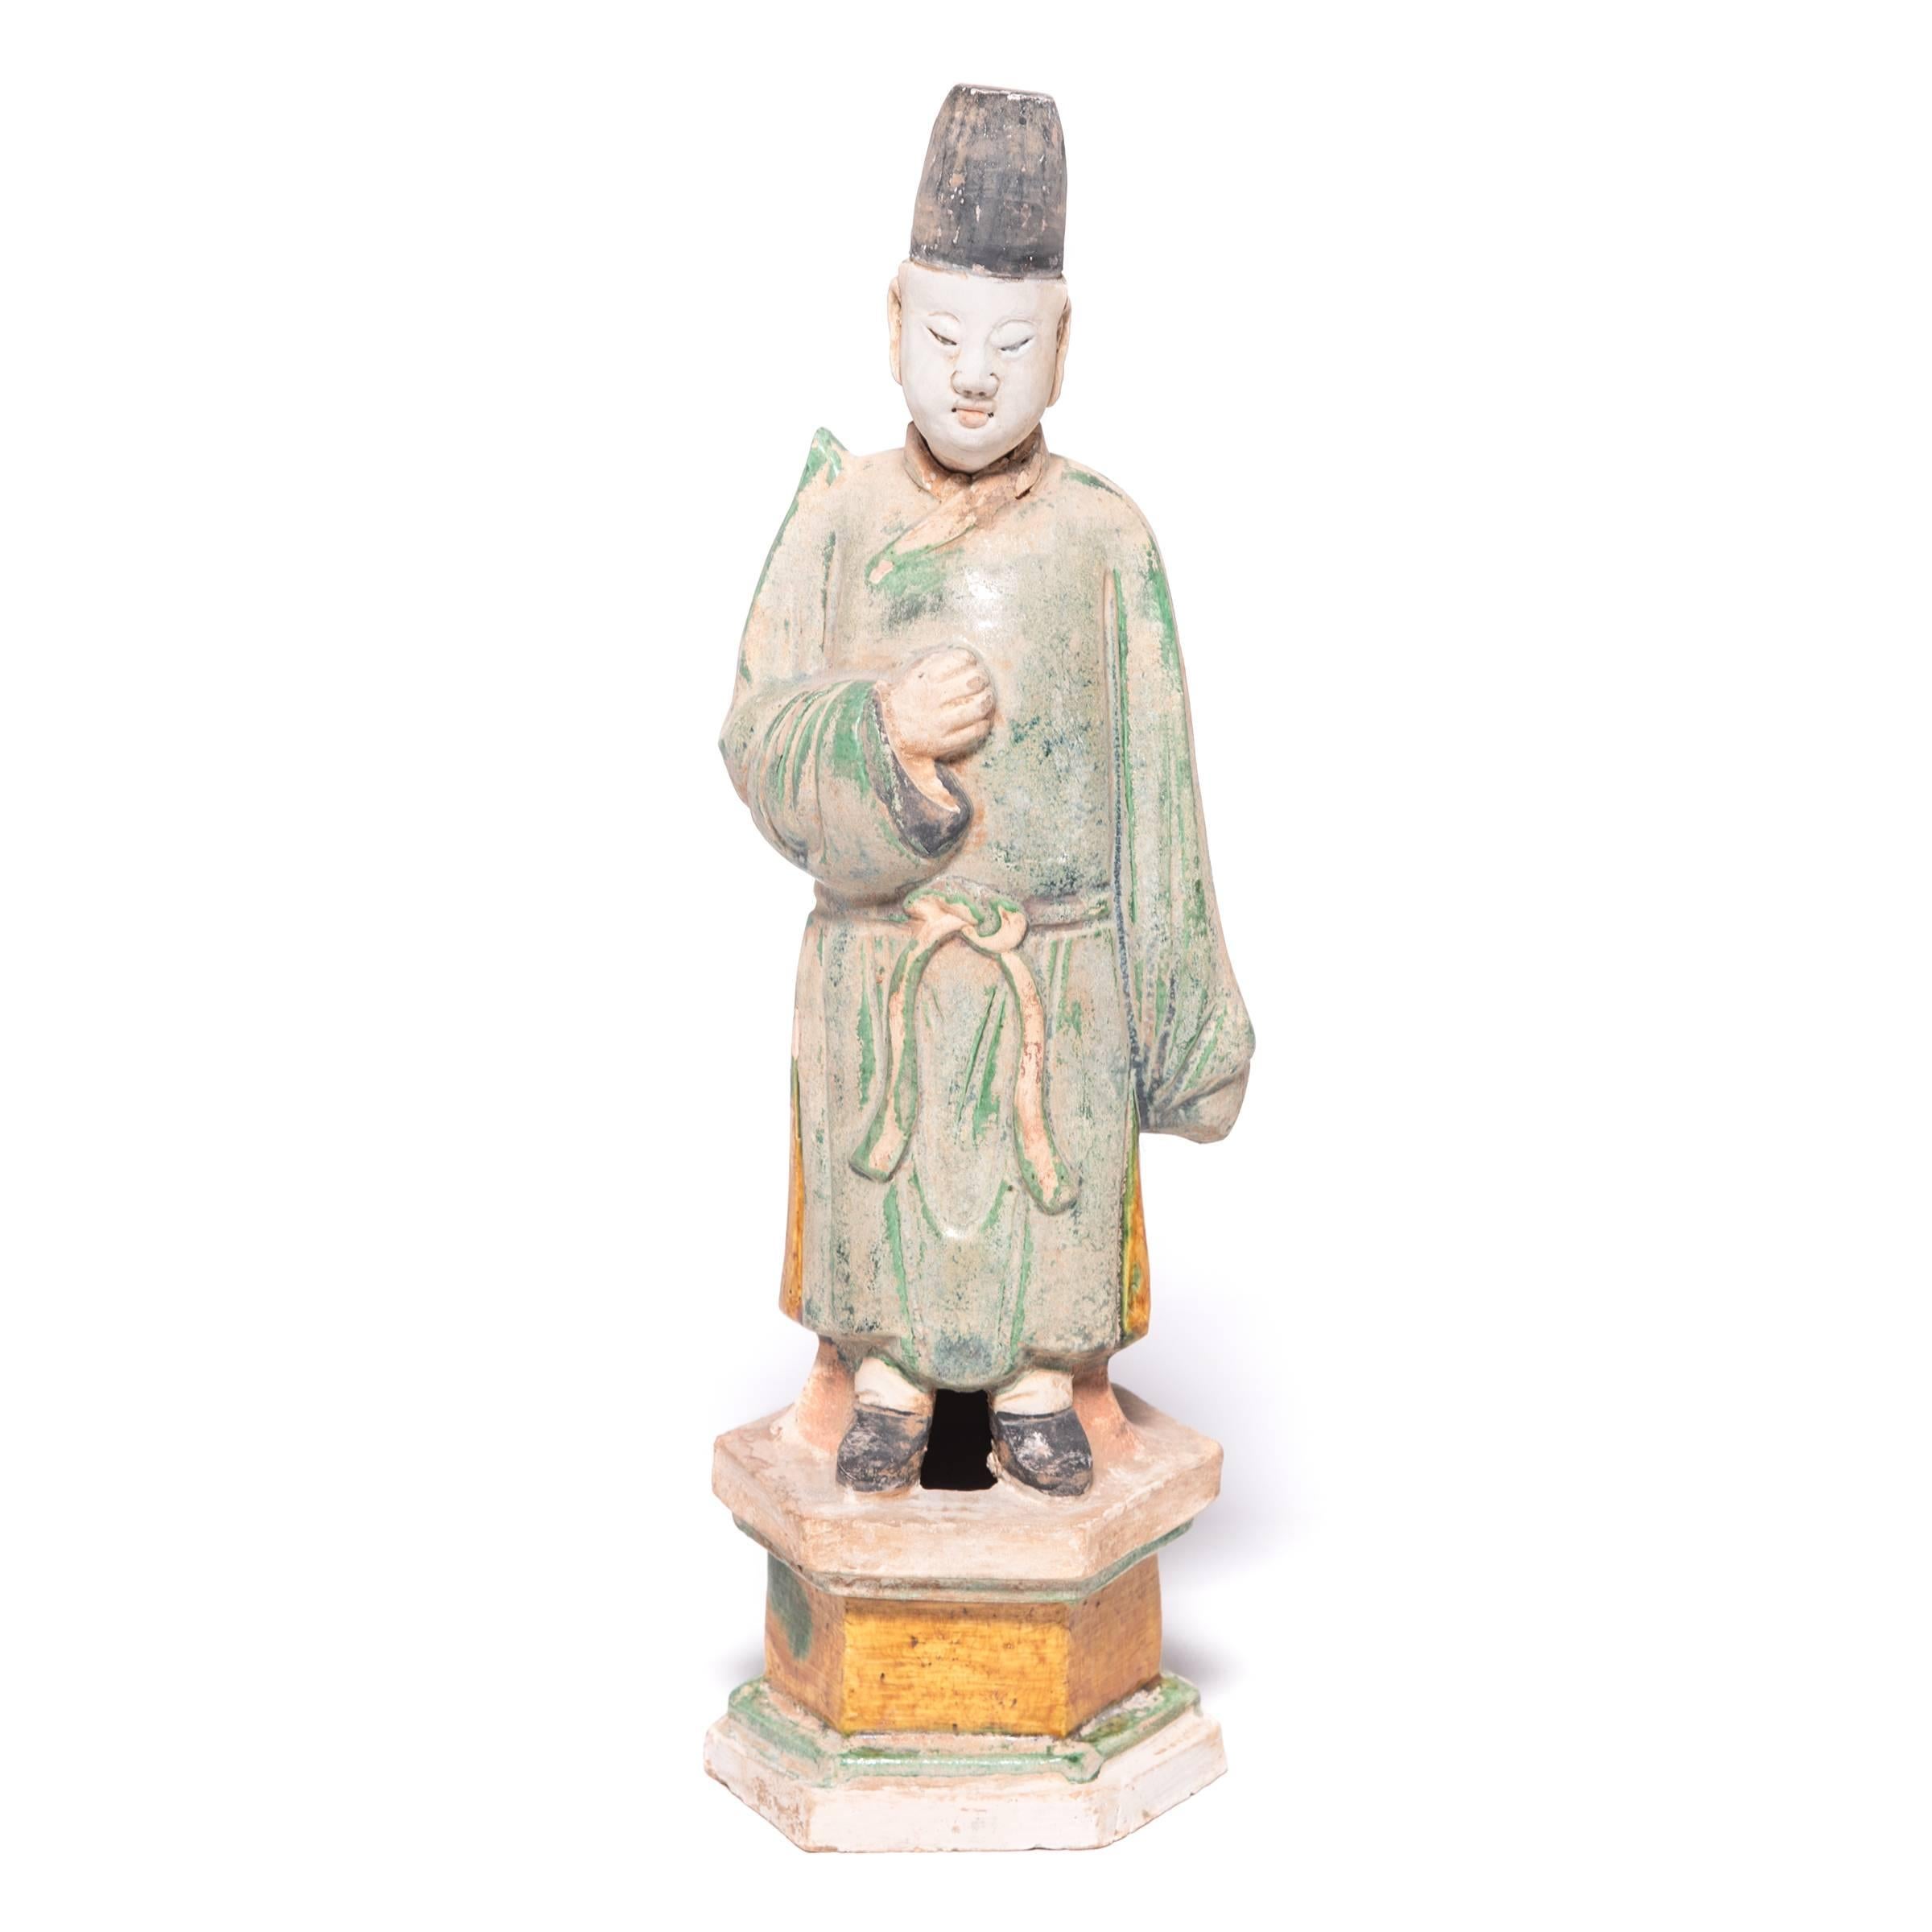 This remarkable pair of attendant figures came to us from a Chicago-area collector devoted to mingqi. Depicting the pleasures of daily life, these ceramic figures were offerings to ensure special treatment in the afterlife. Coated with green, amber,